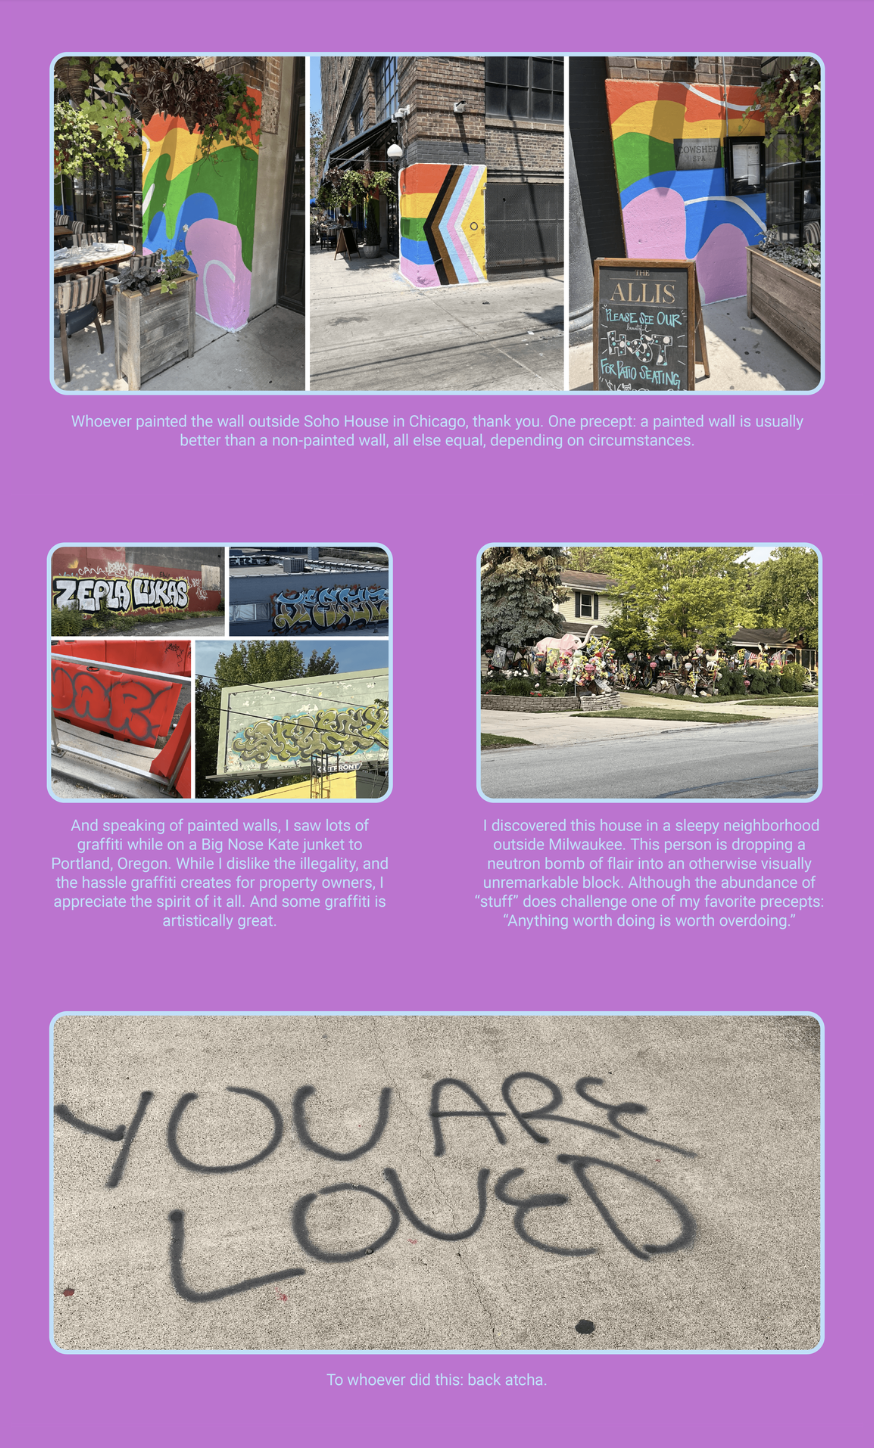 The image is a collage featuring various photographs of painted walls and graffiti, as well as a message written on a sidewalk. Each photograph is accompanied by a caption. Here is the alt text including all of the text that appears in the image:

"The image is a collection of photos showcasing urban art. The top two photos display a colorful mural on a wall outside the Soho House in Chicago, with a caption appreciating the artist's work. The middle row of images shows different graffiti artworks with a caption acknowledging the artistic spirit despite the legal issues. The left image has the text 'ZEPLA LUKAS' and the right one depicts a house with multiple objects and decorations, with a caption about the visual 'neutron bomb' of items. The bottom photo shows sidewalk graffiti that reads 'YOU ARE LOVED,' with a caption responding positively to the anonymous artist. The background is pink, and the text, 'To whoever did this: back atcha.' is placed at the bottom."